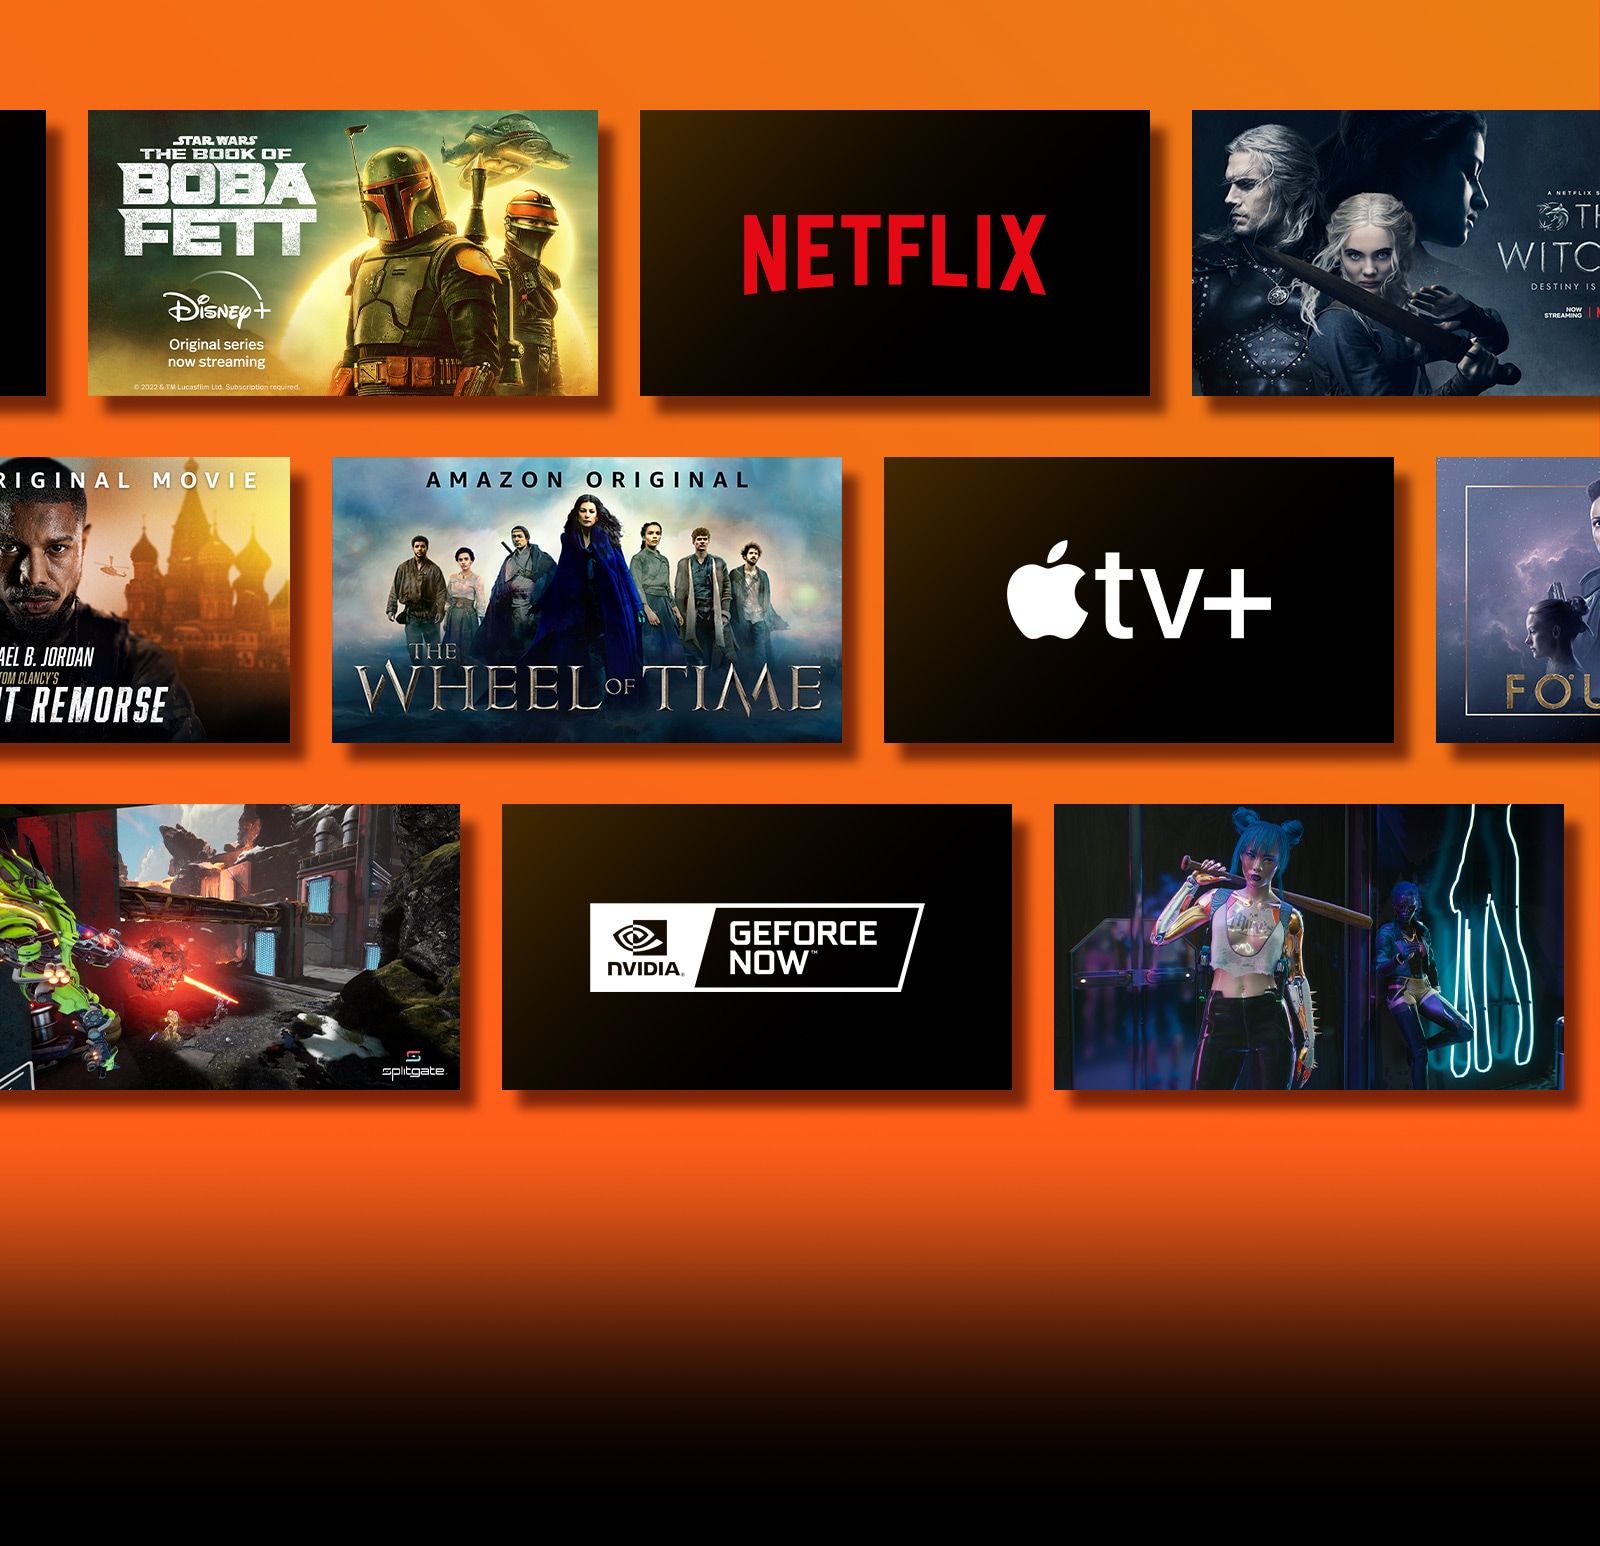 There are logos of streaming service platforms and matching footages right next to each logo. Netflix logo and money heist and the Witcher. Prime Video logo and Without Remorse and The Wheel of Time. Livenow logo and mamamoo teaser image and OneUs teaser image. NVIDIA Geforce Now logo and gameplay images of Cyberpunk 2077 and Splitgate. Apple TV plus logo and Foundation and Finch.